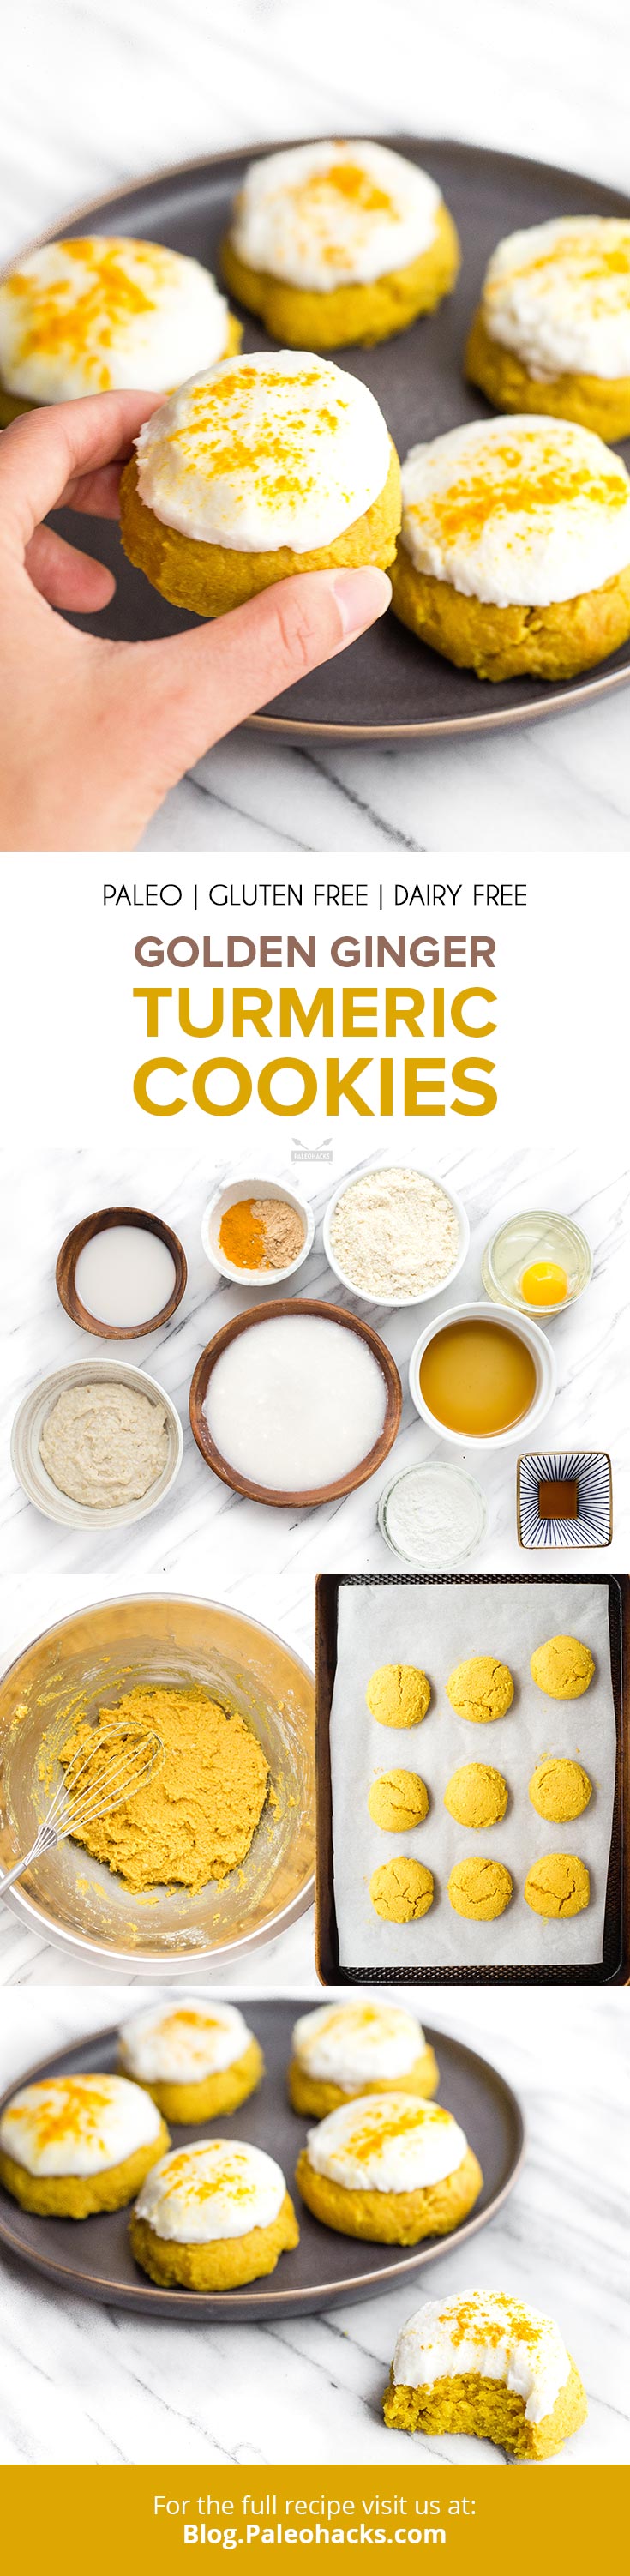 Bake up these golden turmeric cookies made with gluten-free flour and coconut cream icing. Half cookie, half cake, and none of the guilt!